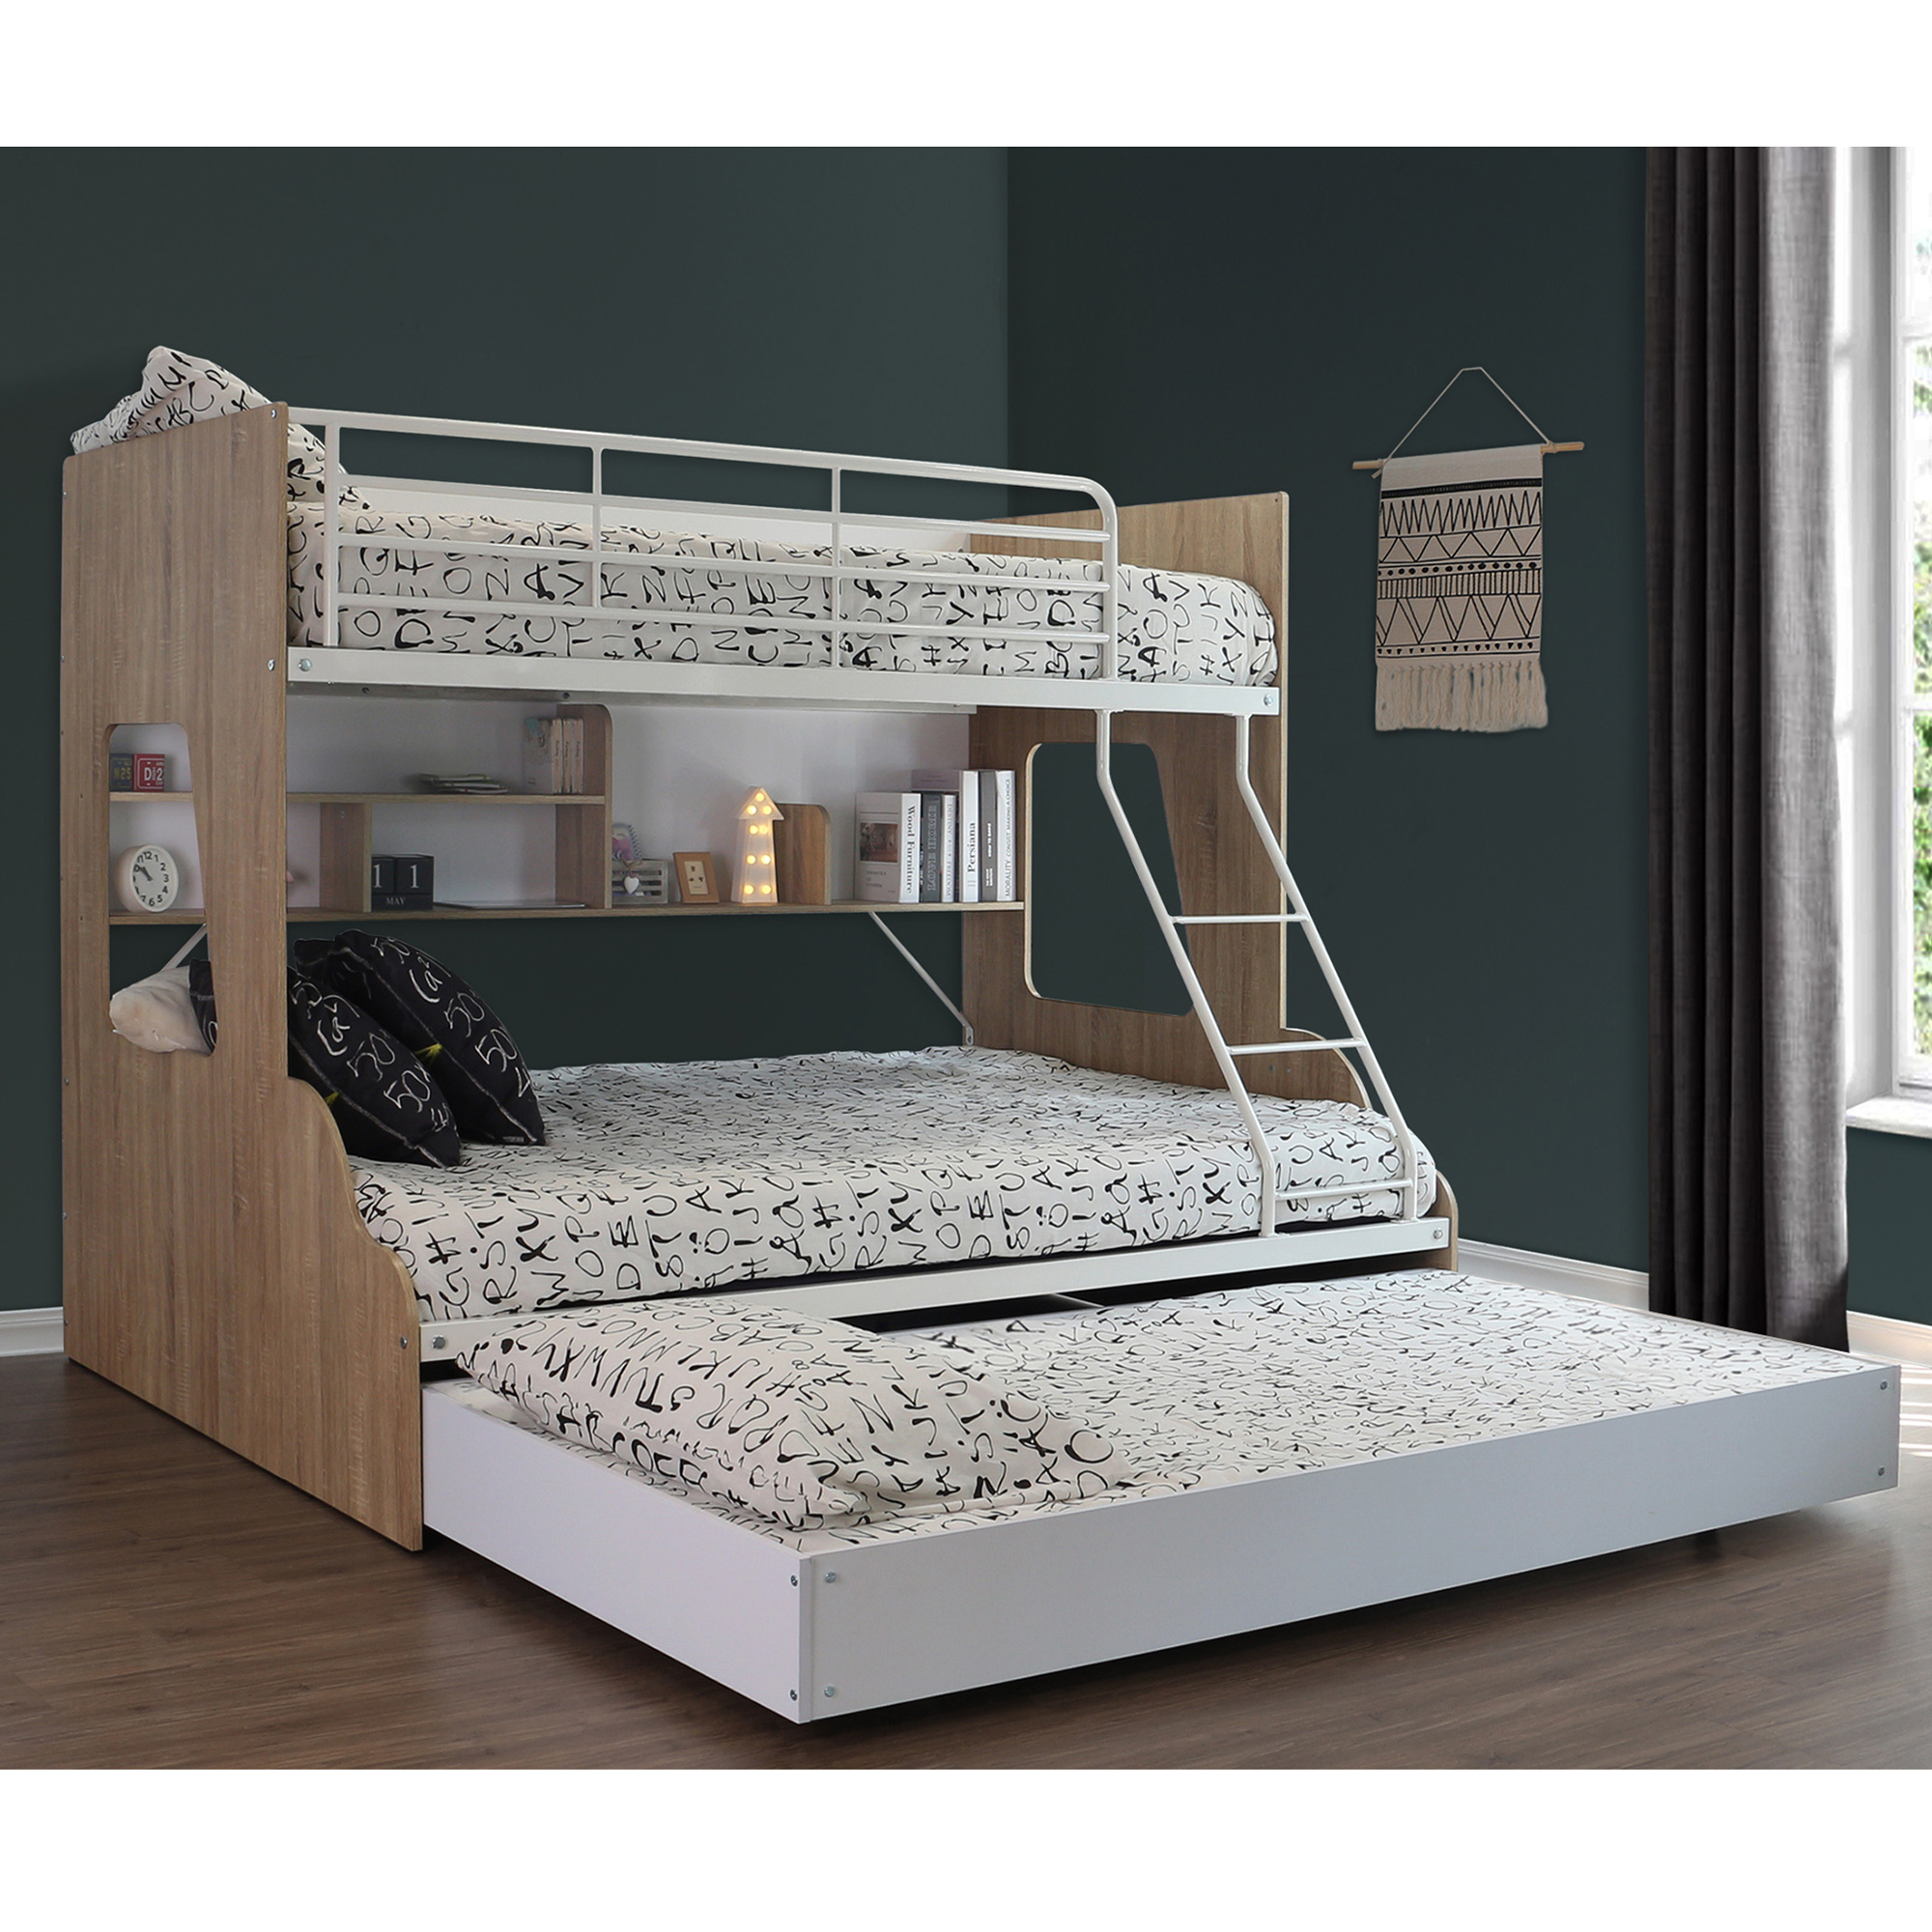 Single Over Double Trio Bunk Bed, Twin Single Bunk Bed